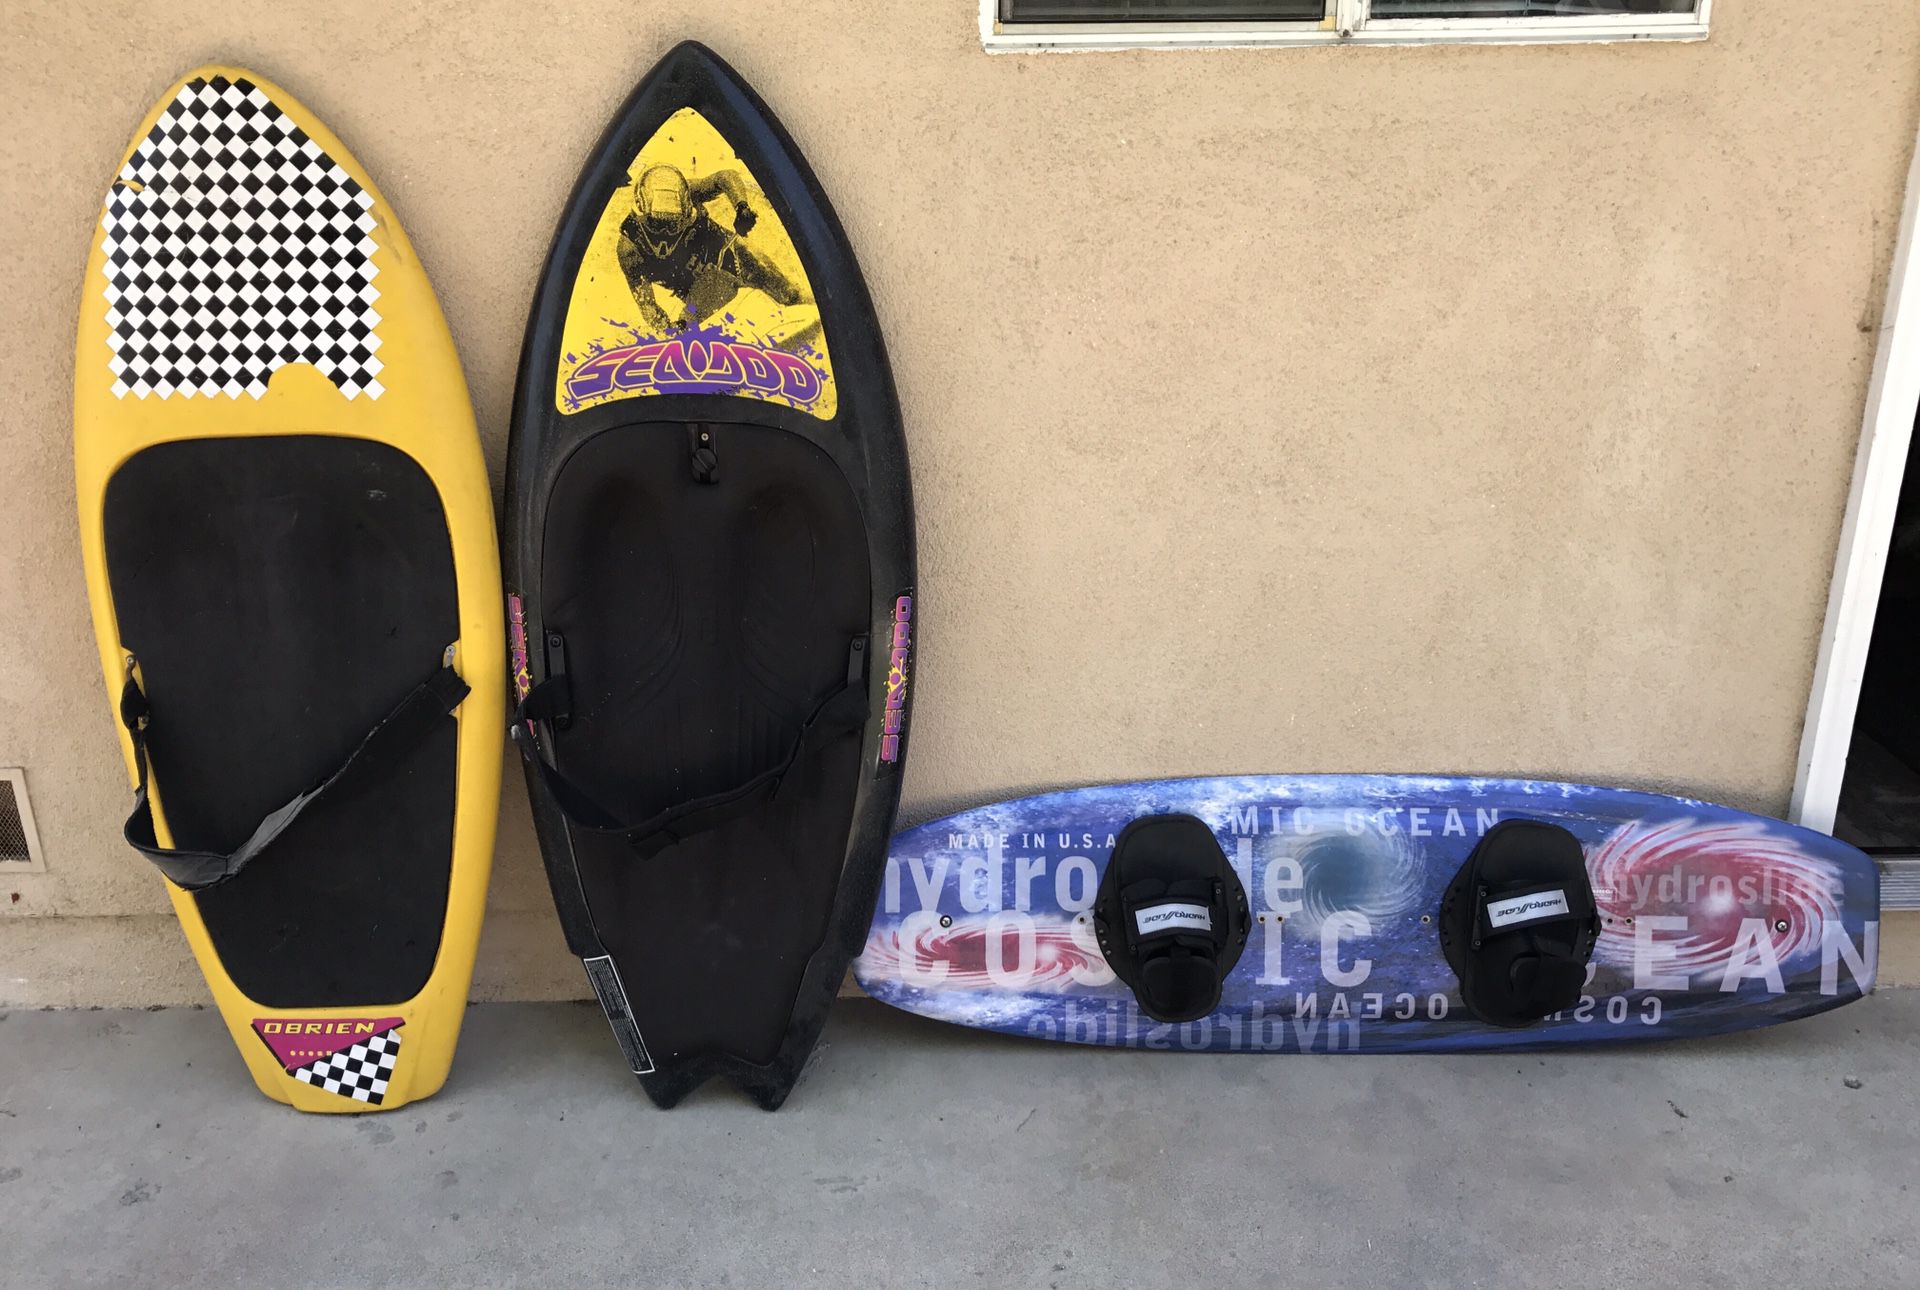 Water Toys - 2 Kneeboards and 1 Wakeboard